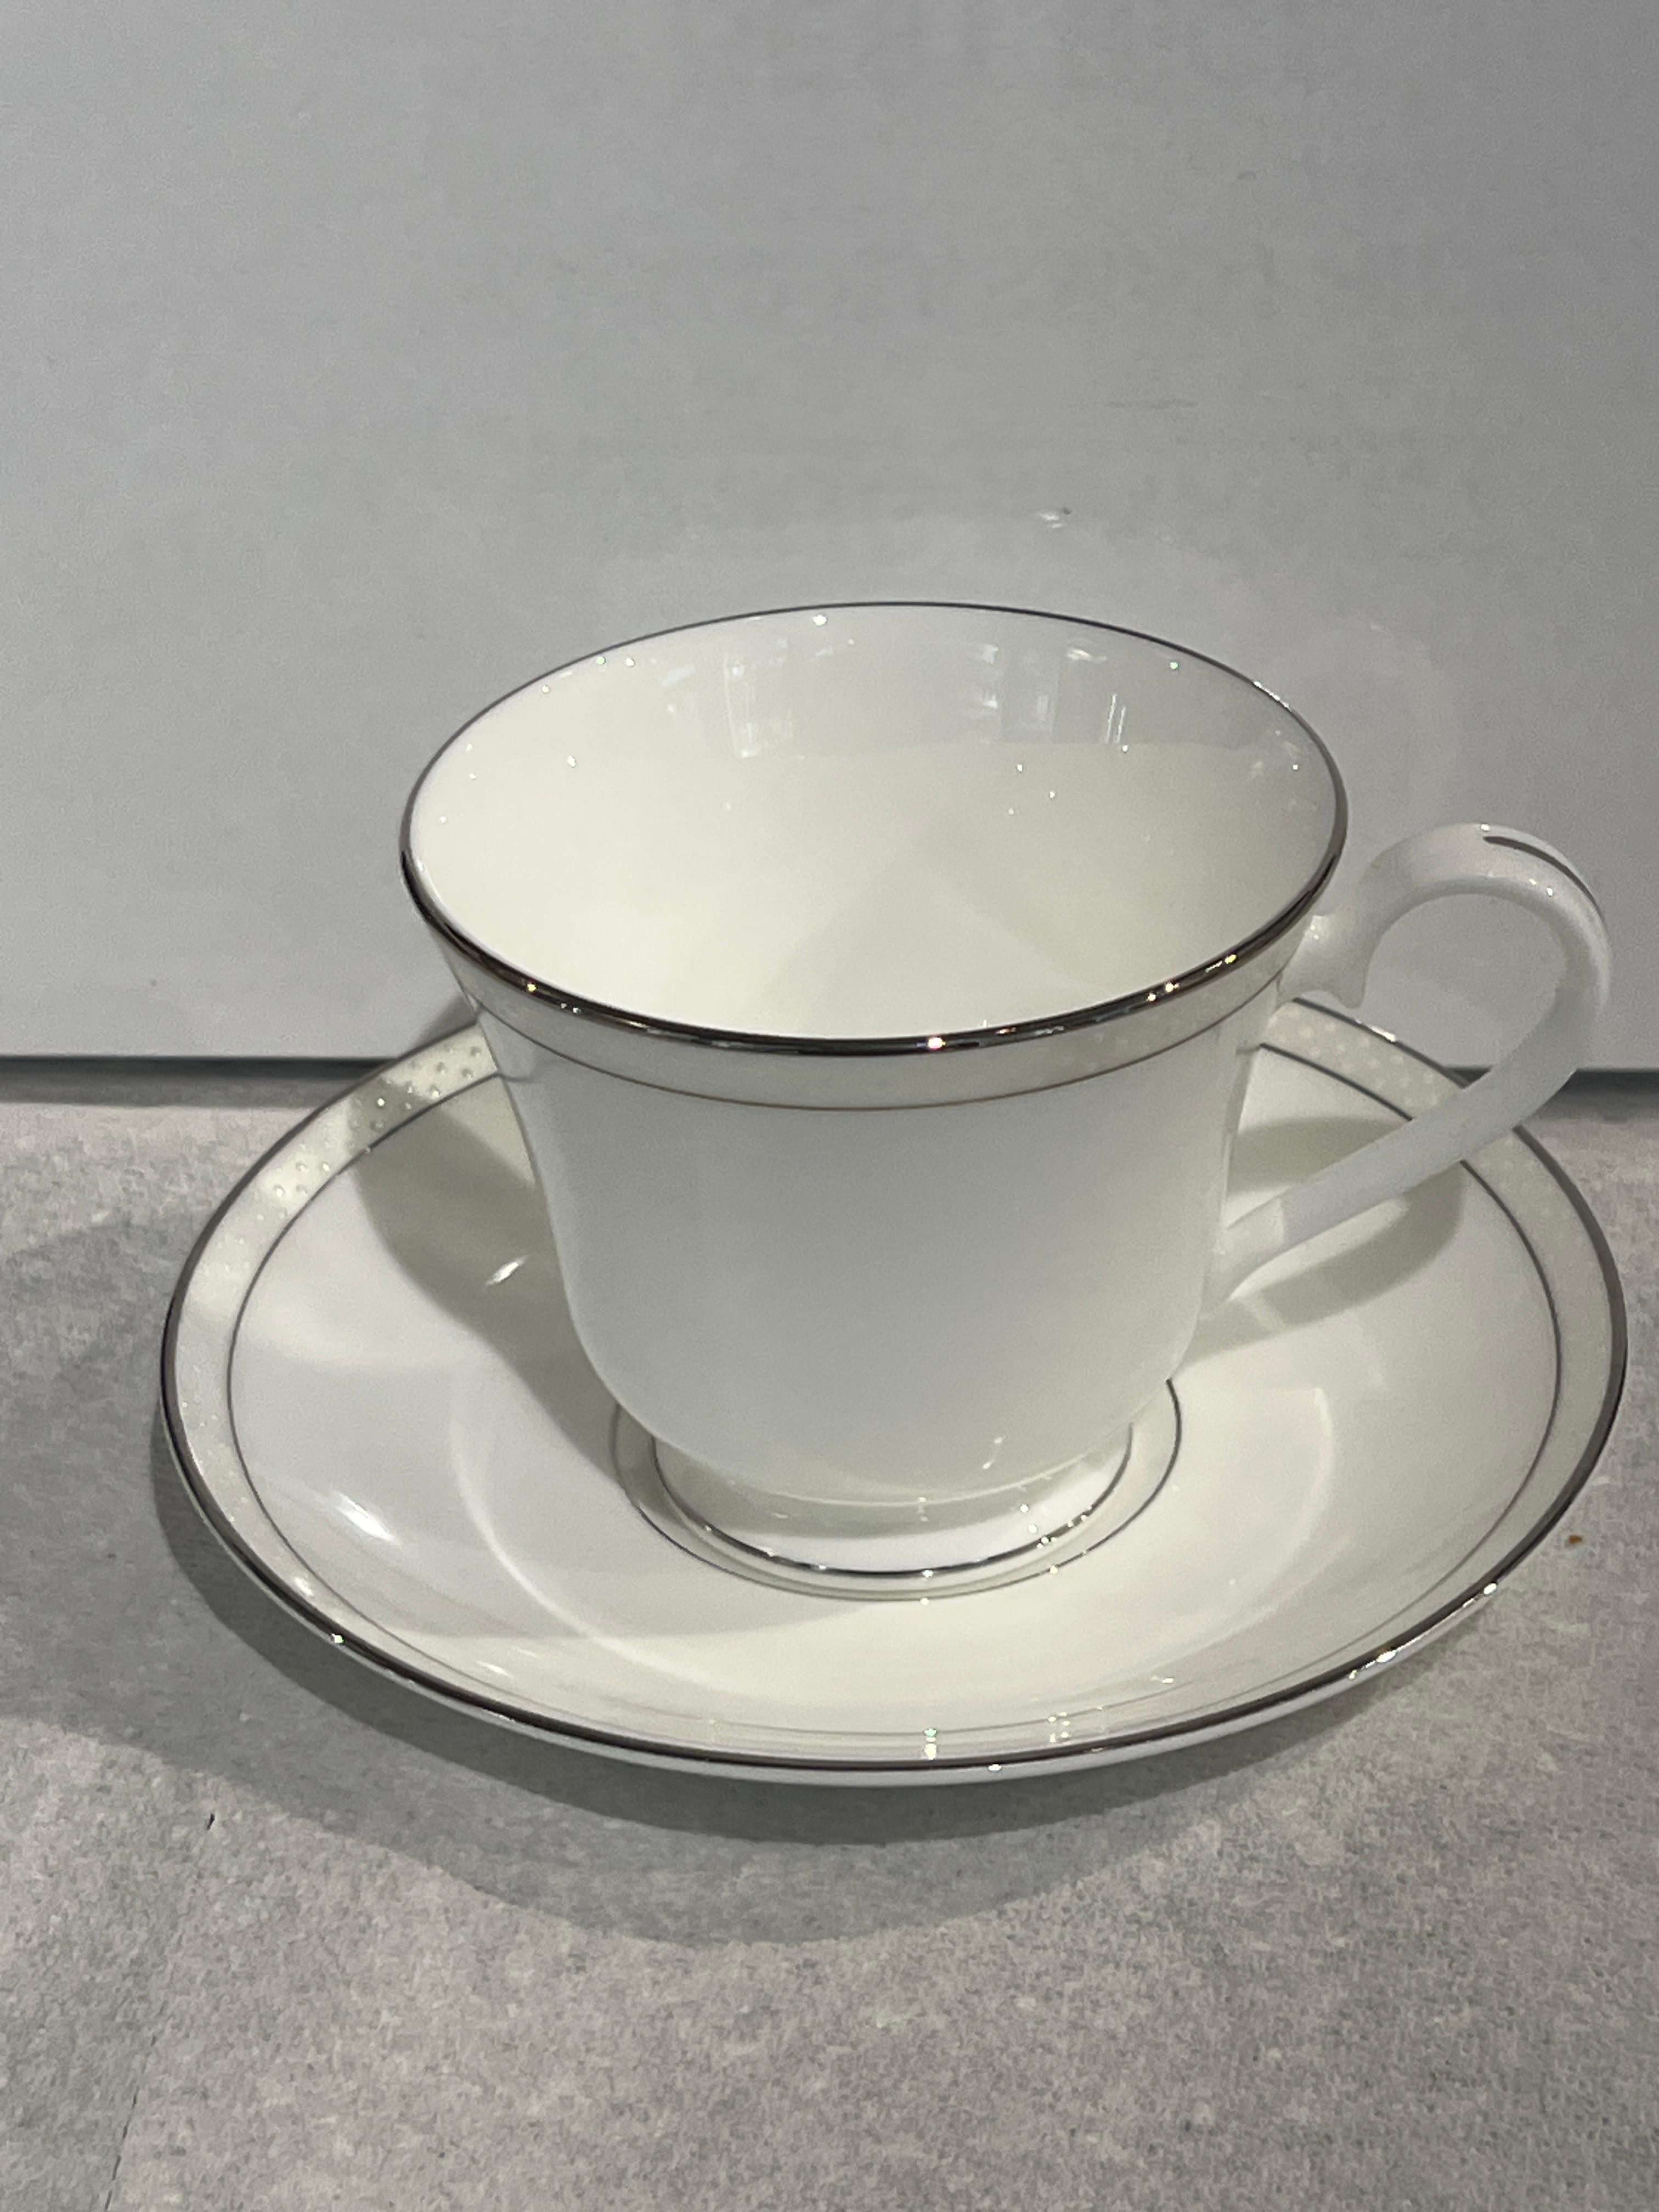 Platinum beaded pearl fine bone china . Nikko made in Japan. Tea cup with plate